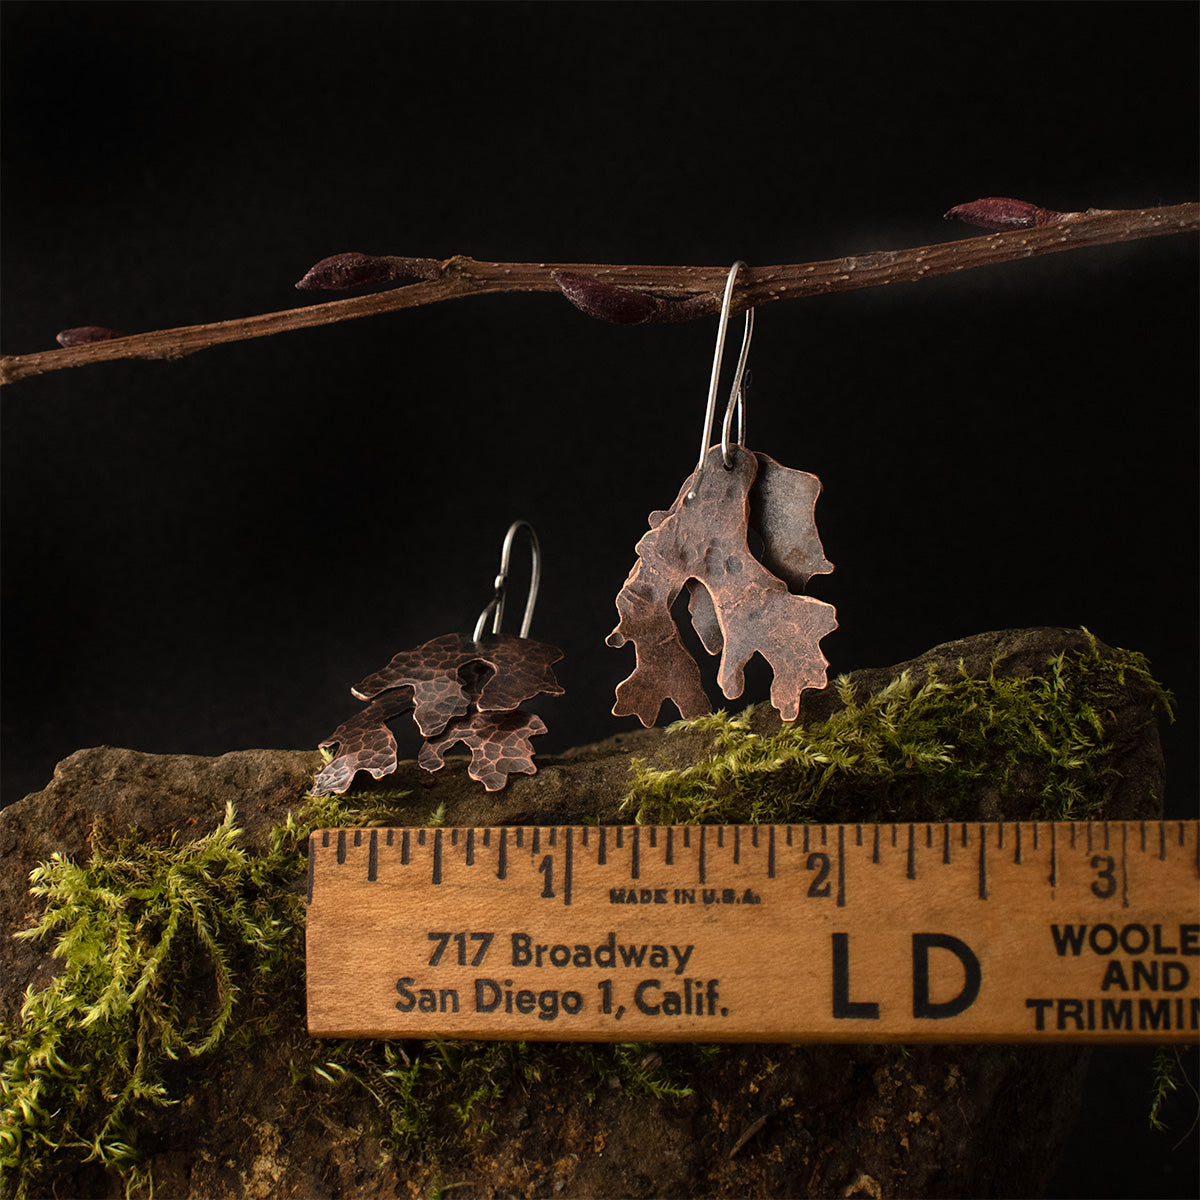 The Copper Layered Lichen Earrings with a ruler for scale, each measuring around 3/4 inches wide.